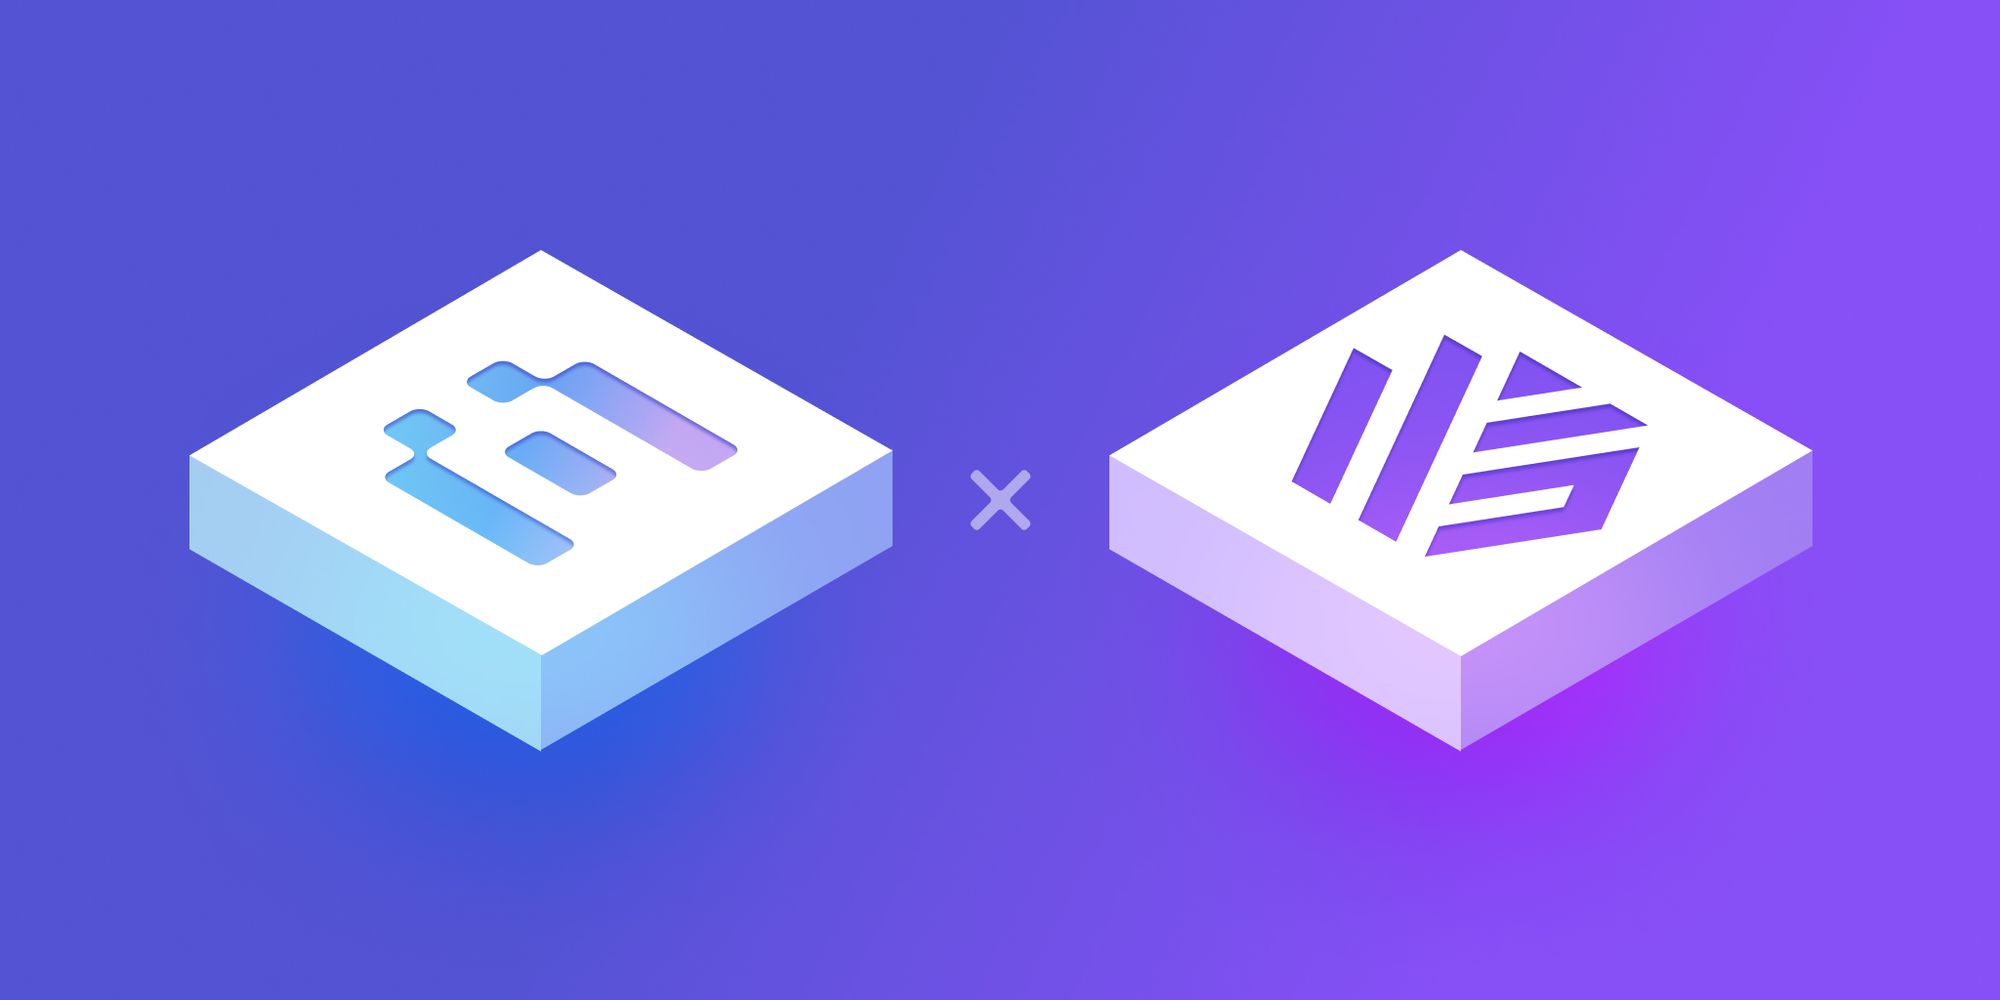 Blockscout and Presto collaborate on RaaS for zk-rollups